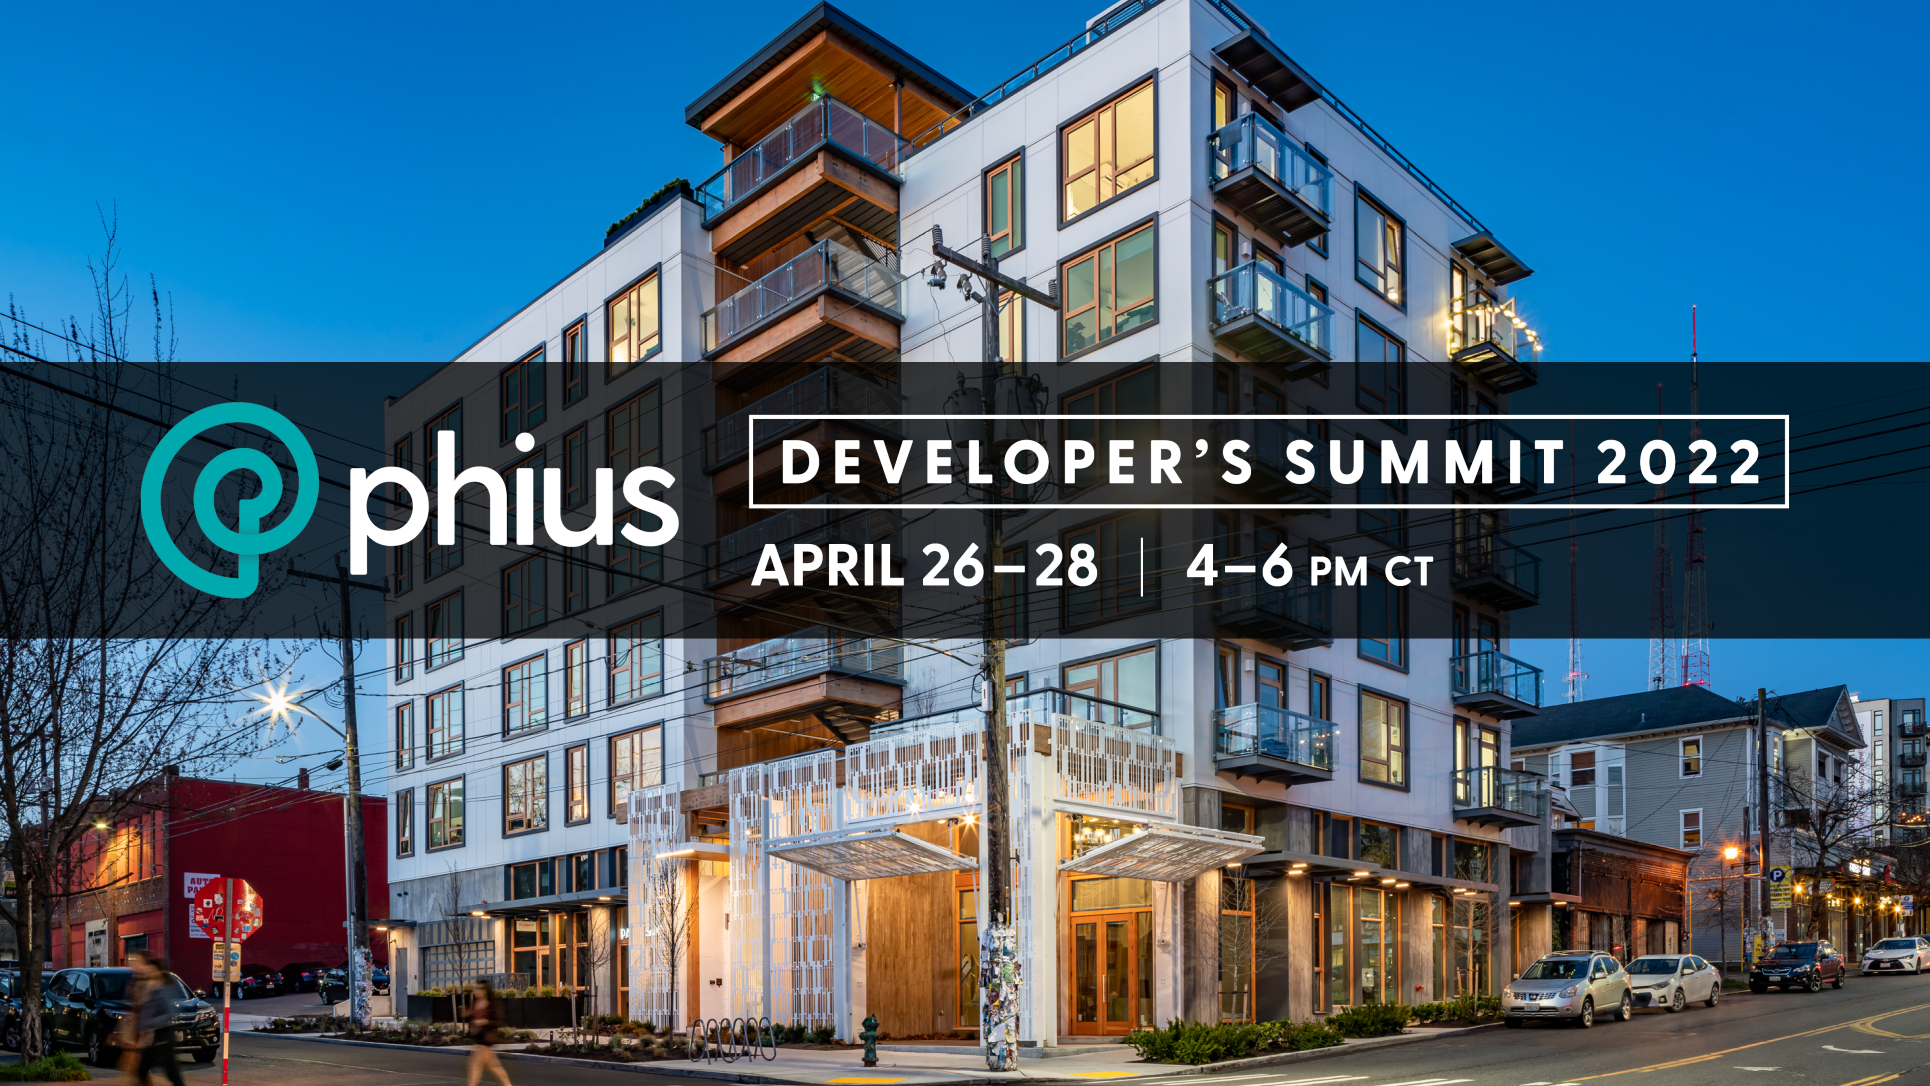 Join the Phius Developer's Summit 2022 (April 26-28)